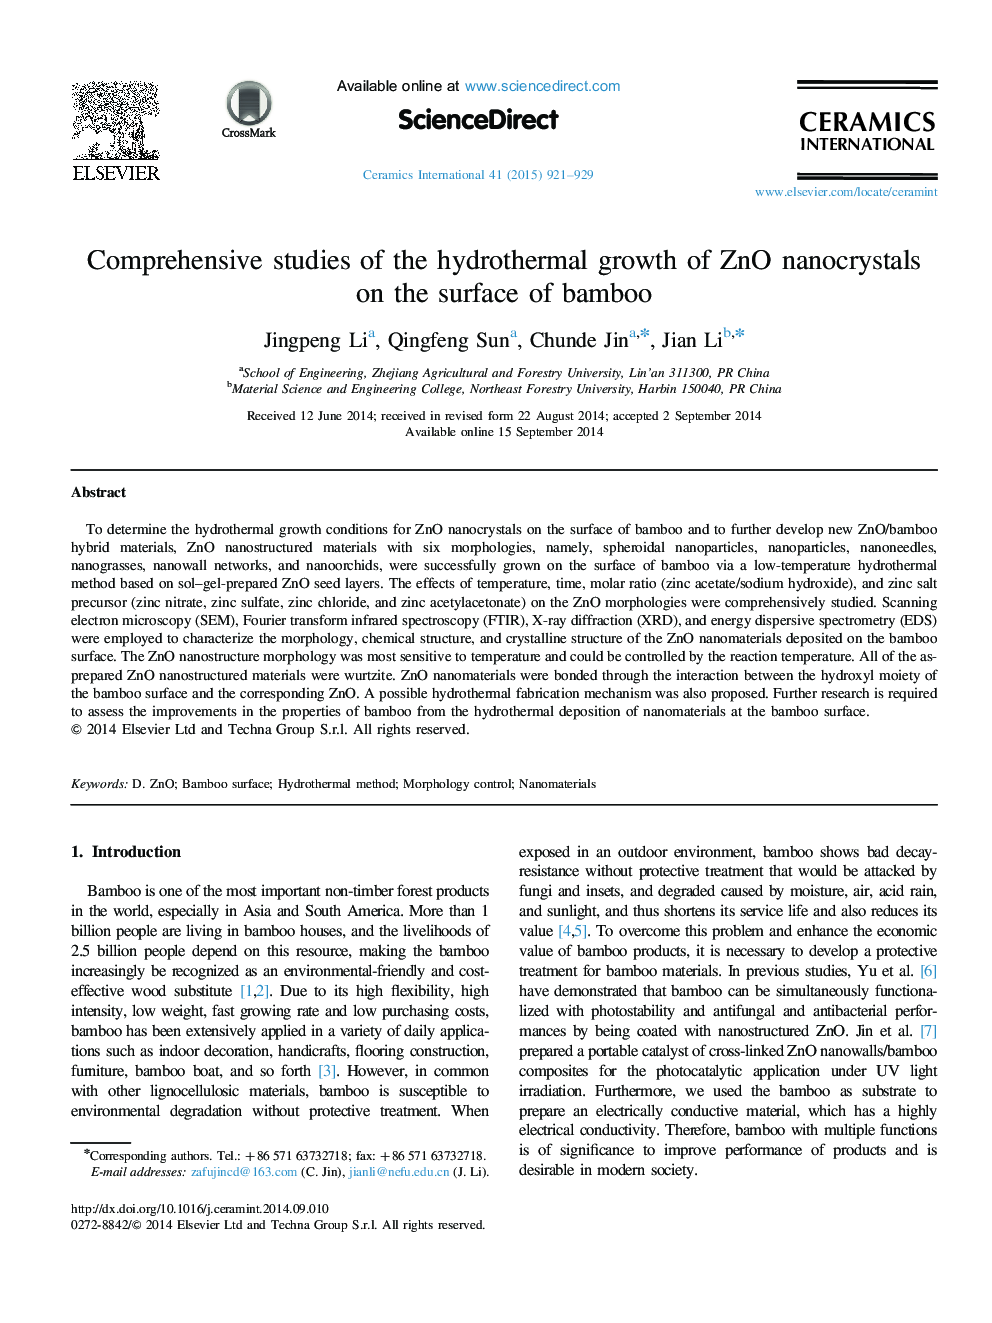 Comprehensive studies of the hydrothermal growth of ZnO nanocrystals on the surface of bamboo